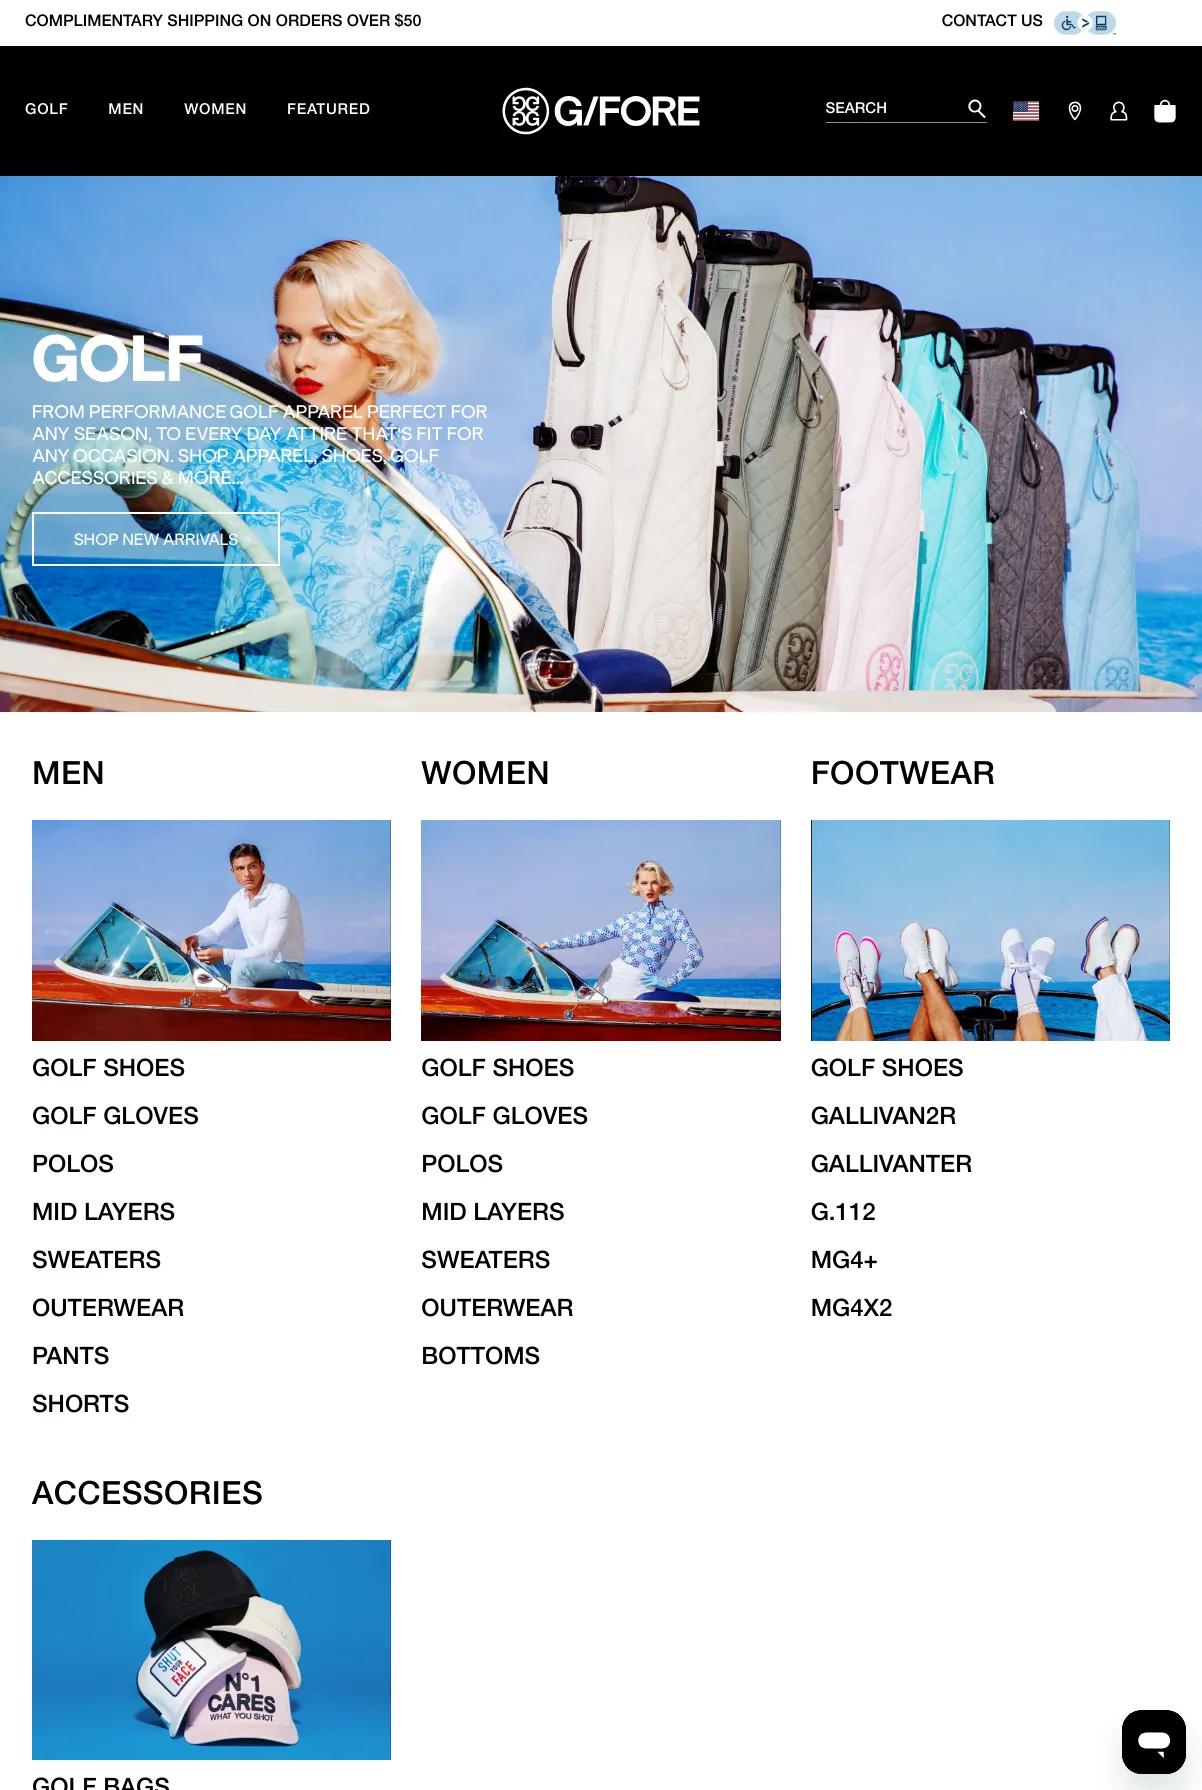 Screenshot 2 of G/FORE (Example Shopify Website)